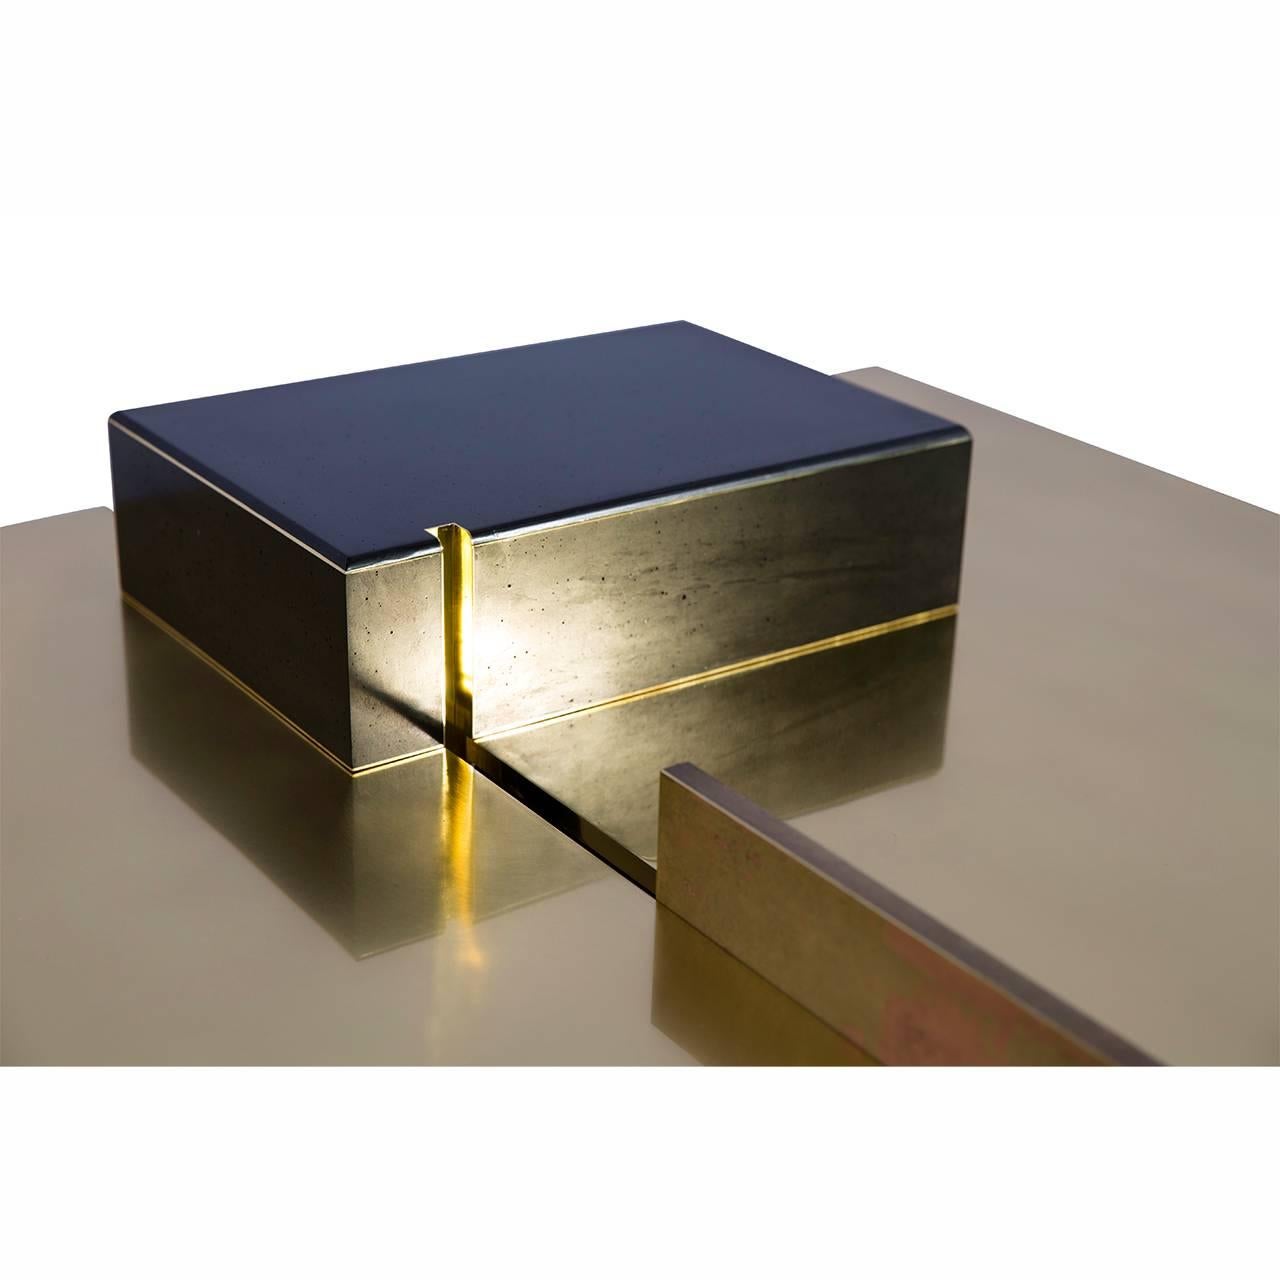 Patinated Modern Low Coffee Table in Polished Brass with Pink Patina and Resin Finish Wood